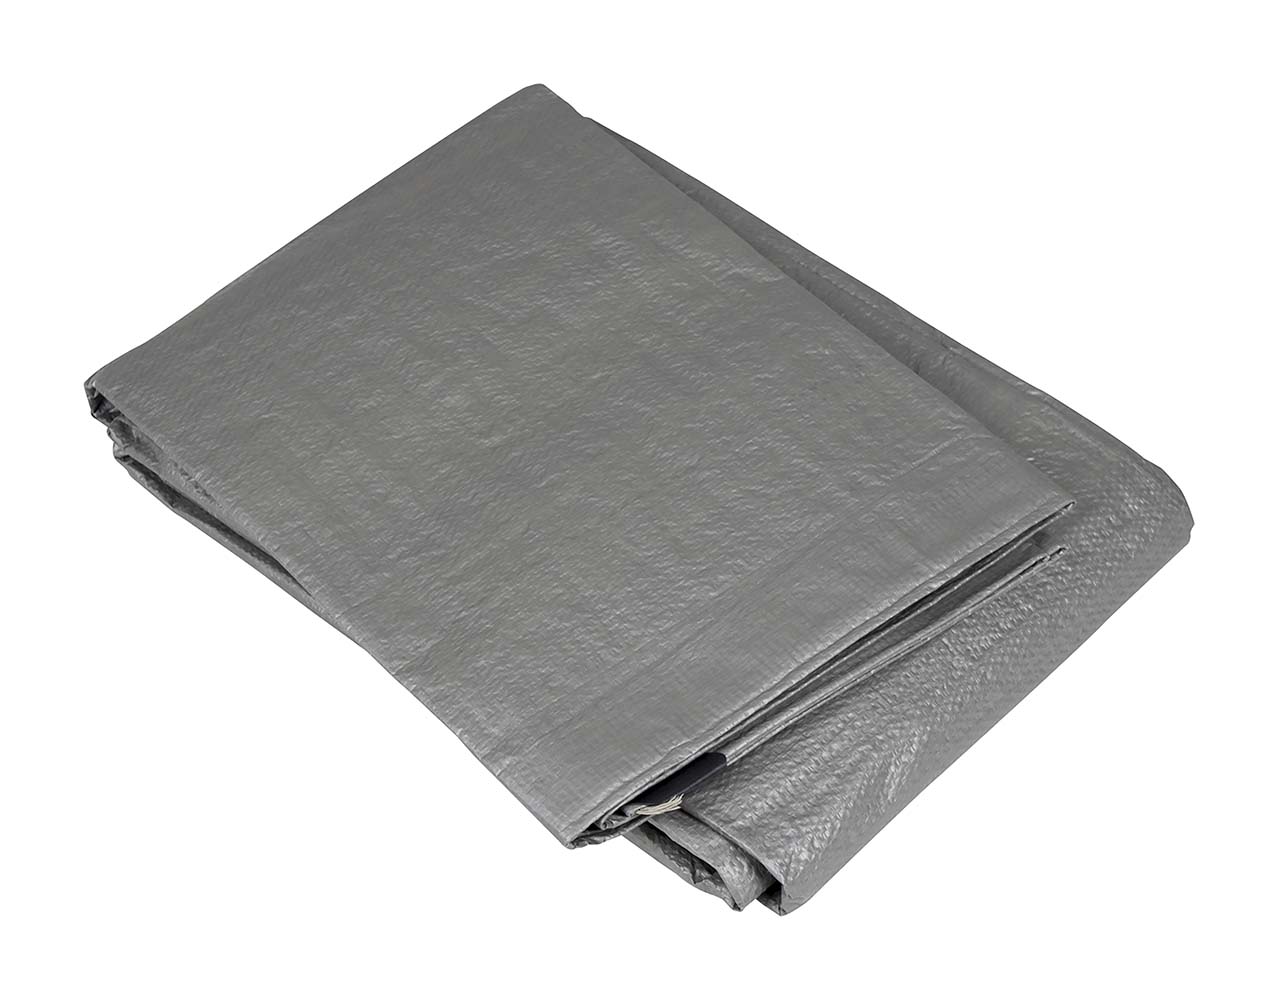 4215975 A sturdy cover sail. This sail is water proof, weather proof and high quality (120 gr/m²). With welded seams, reinforced edges and sturdy eyelets.